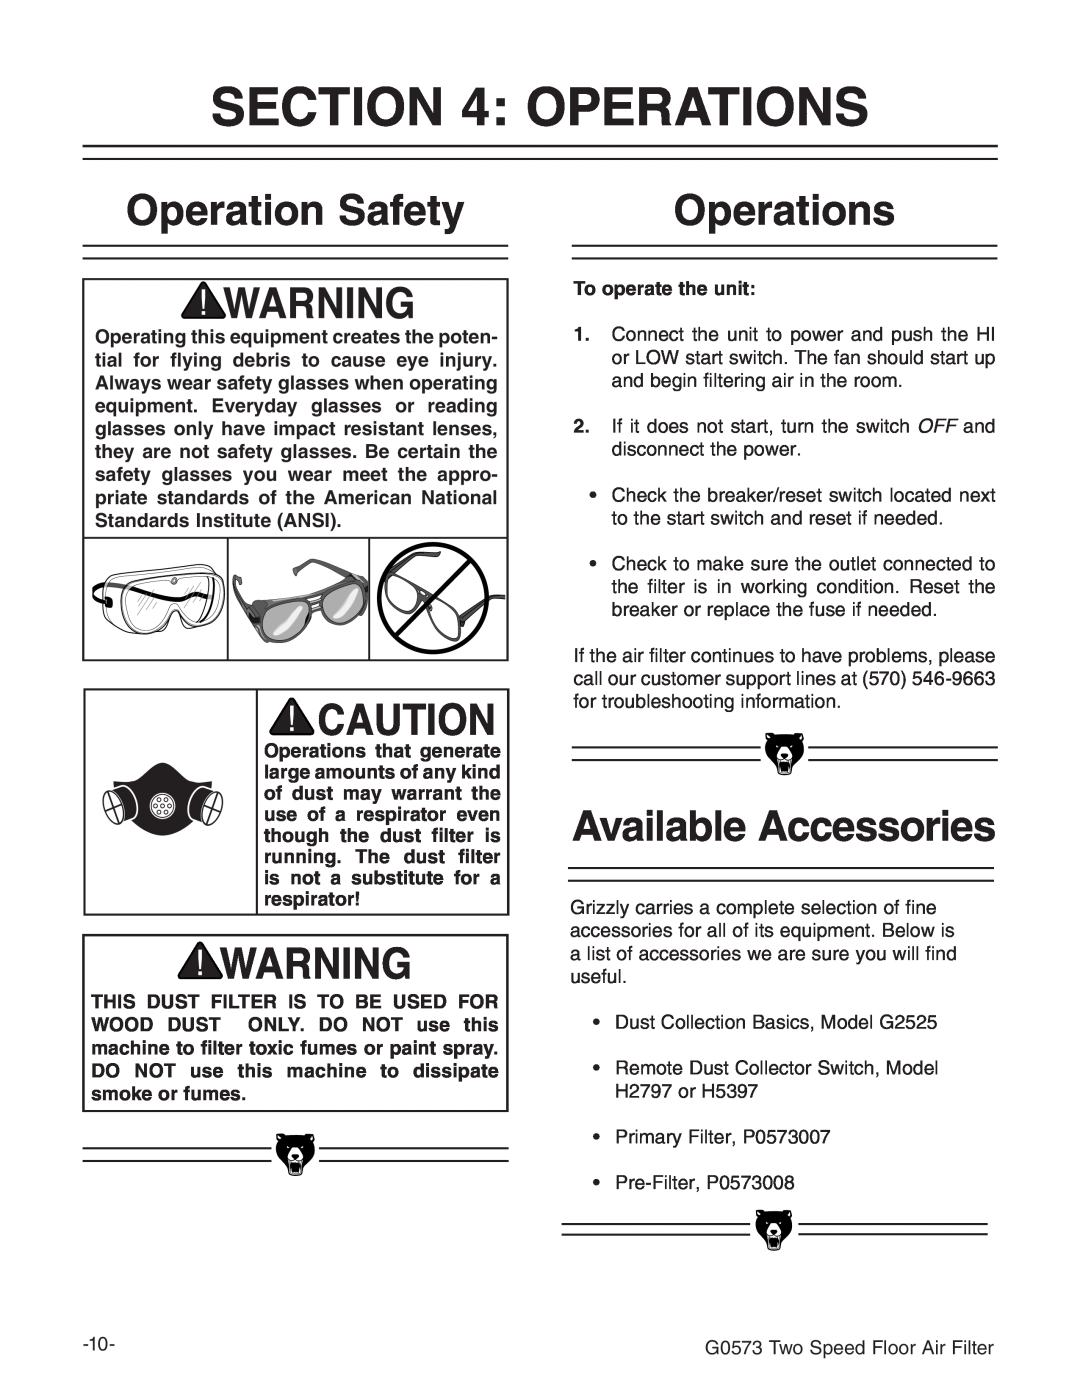 Grizzly G0573 instruction manual Operations, Operation Safety, Available Accessories 